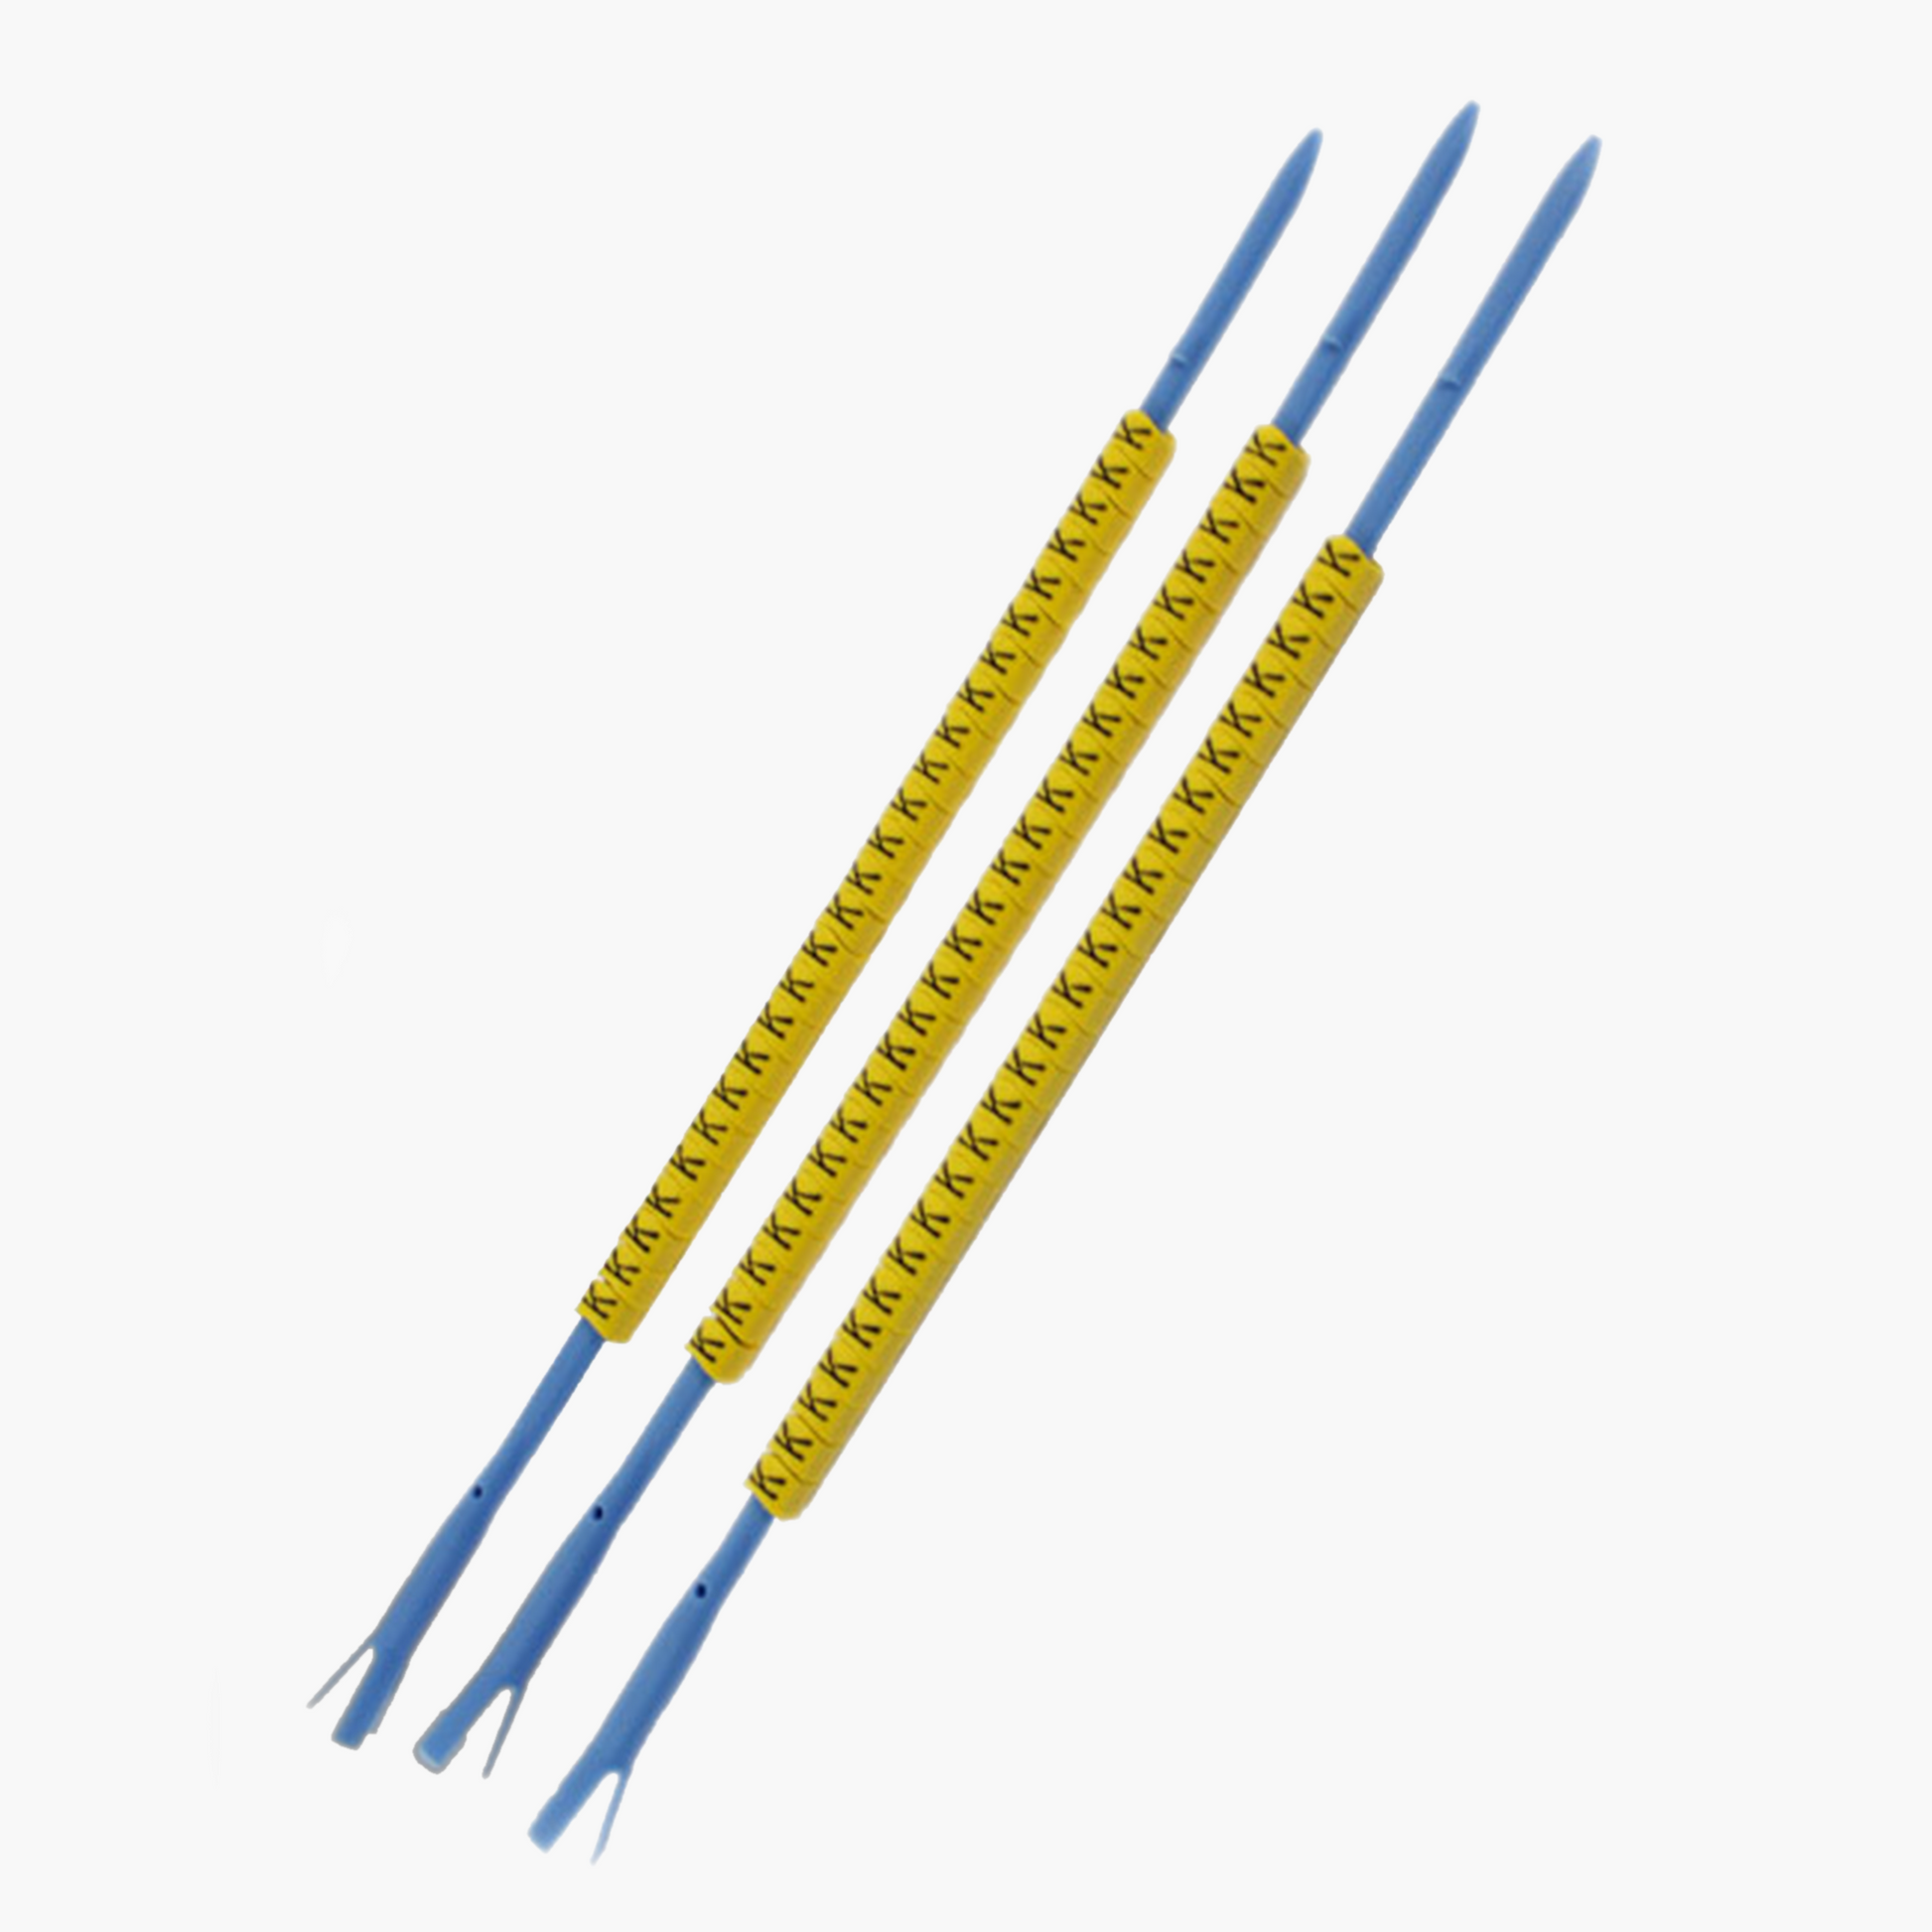 MMDHR-1 cable marking